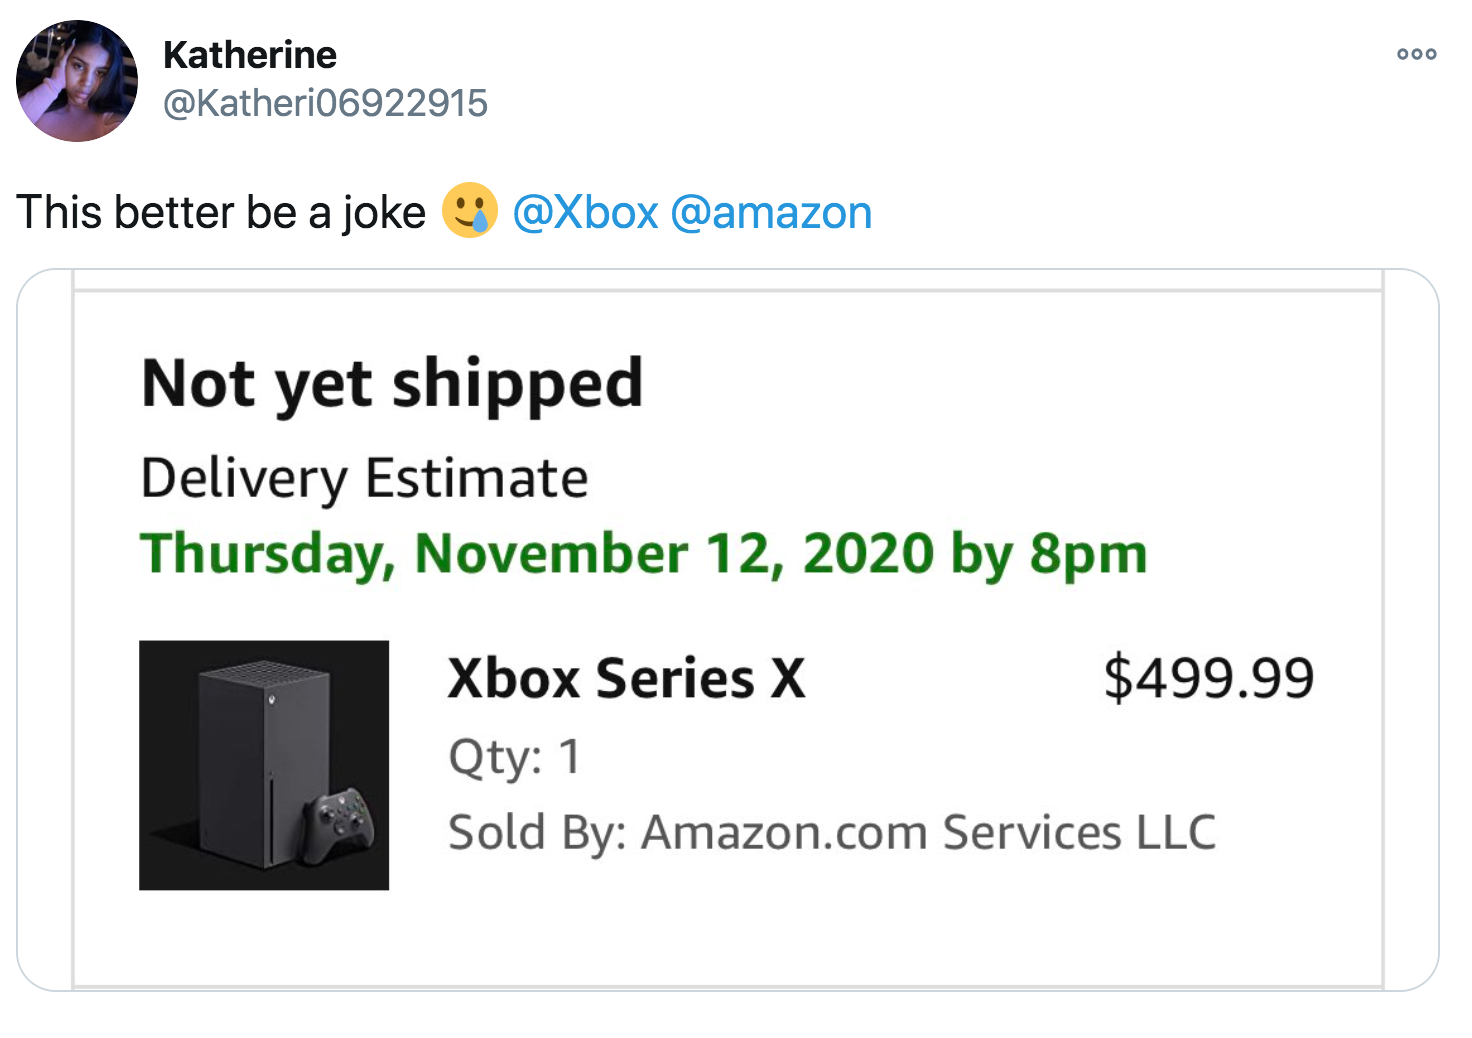 Doo Katherine This better be a joke Not yet shipped Delivery Estimate Thursday, by 8pm Xbox Series X $499.99 Qty 1 Sold By Amazon.com Services Llc